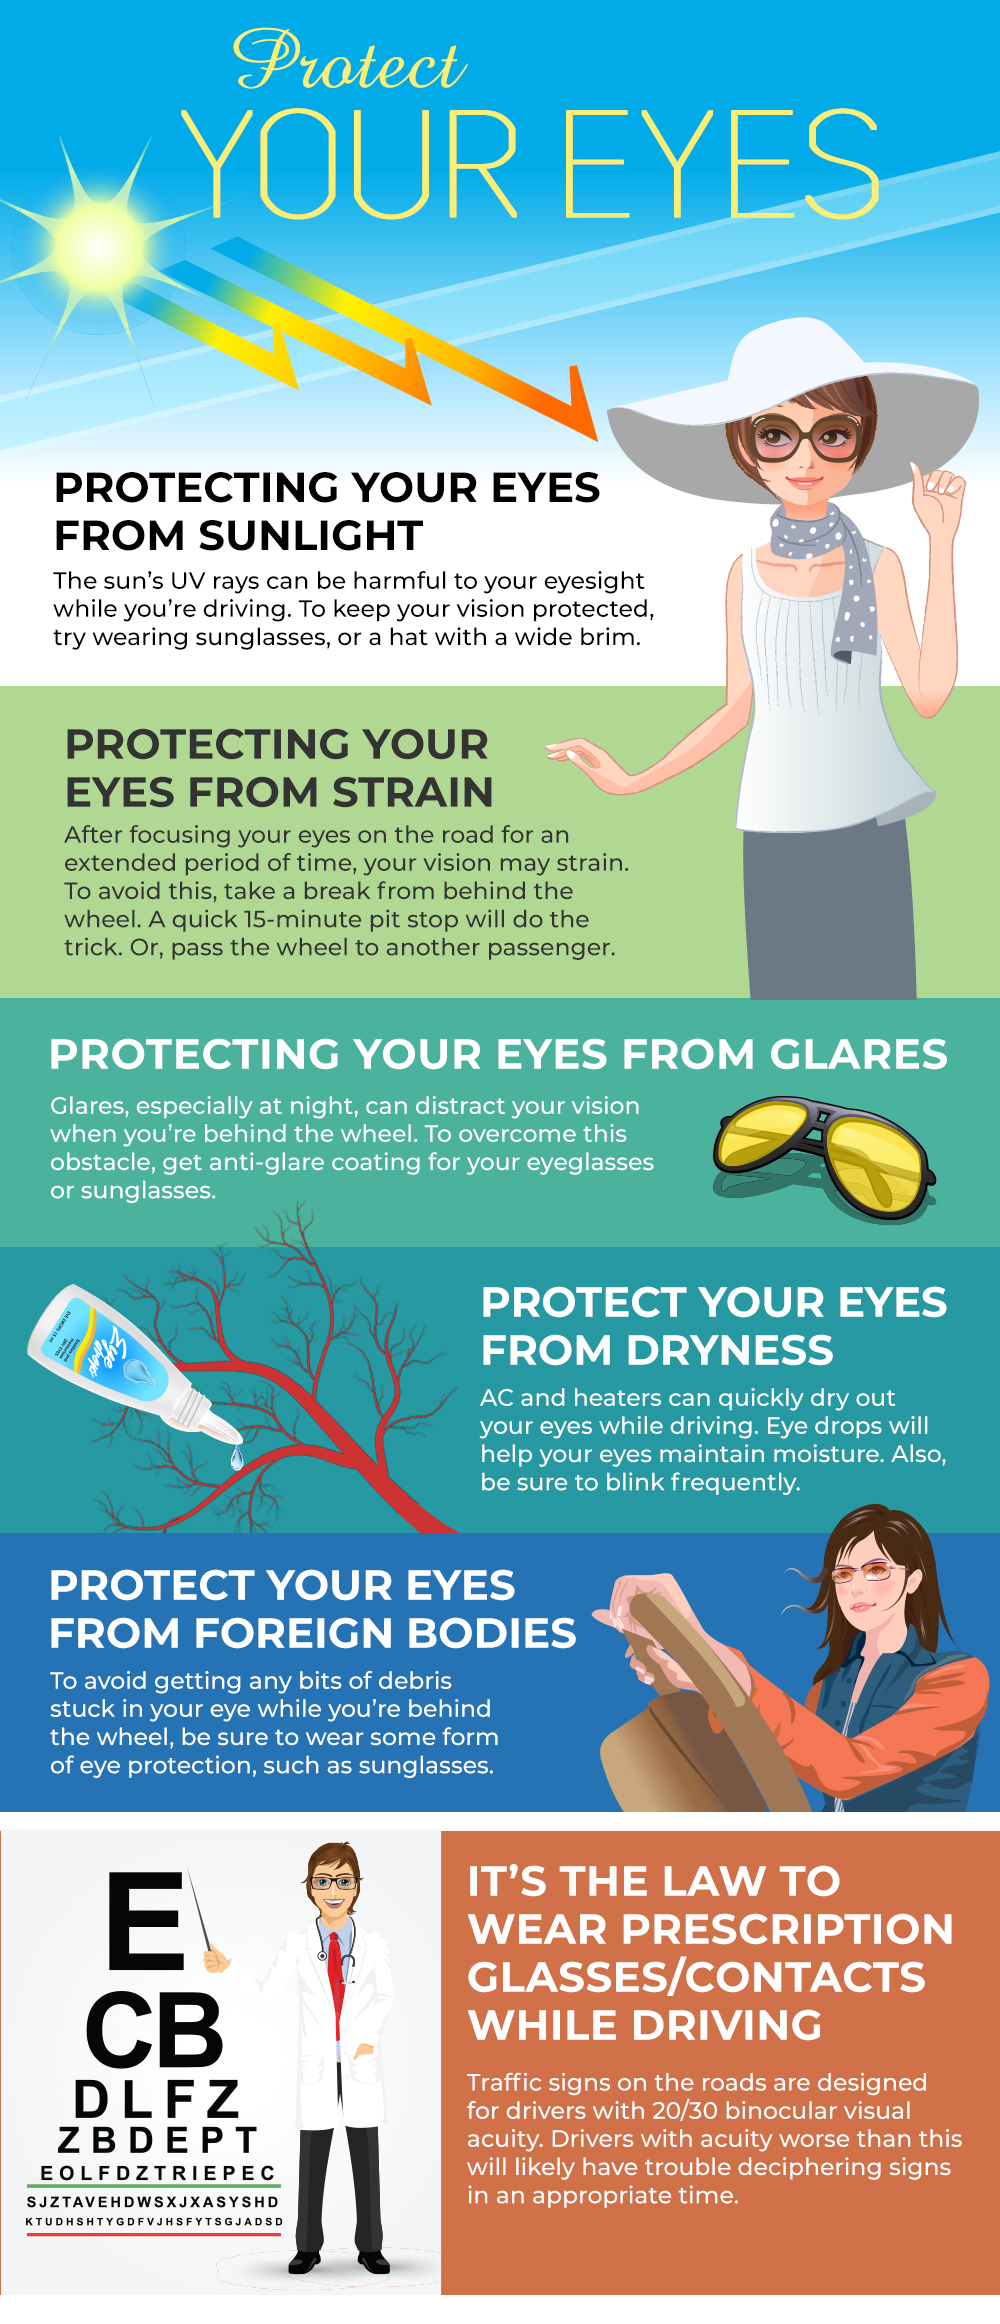 Protect Your Eyes - Midwest Eye Consultants